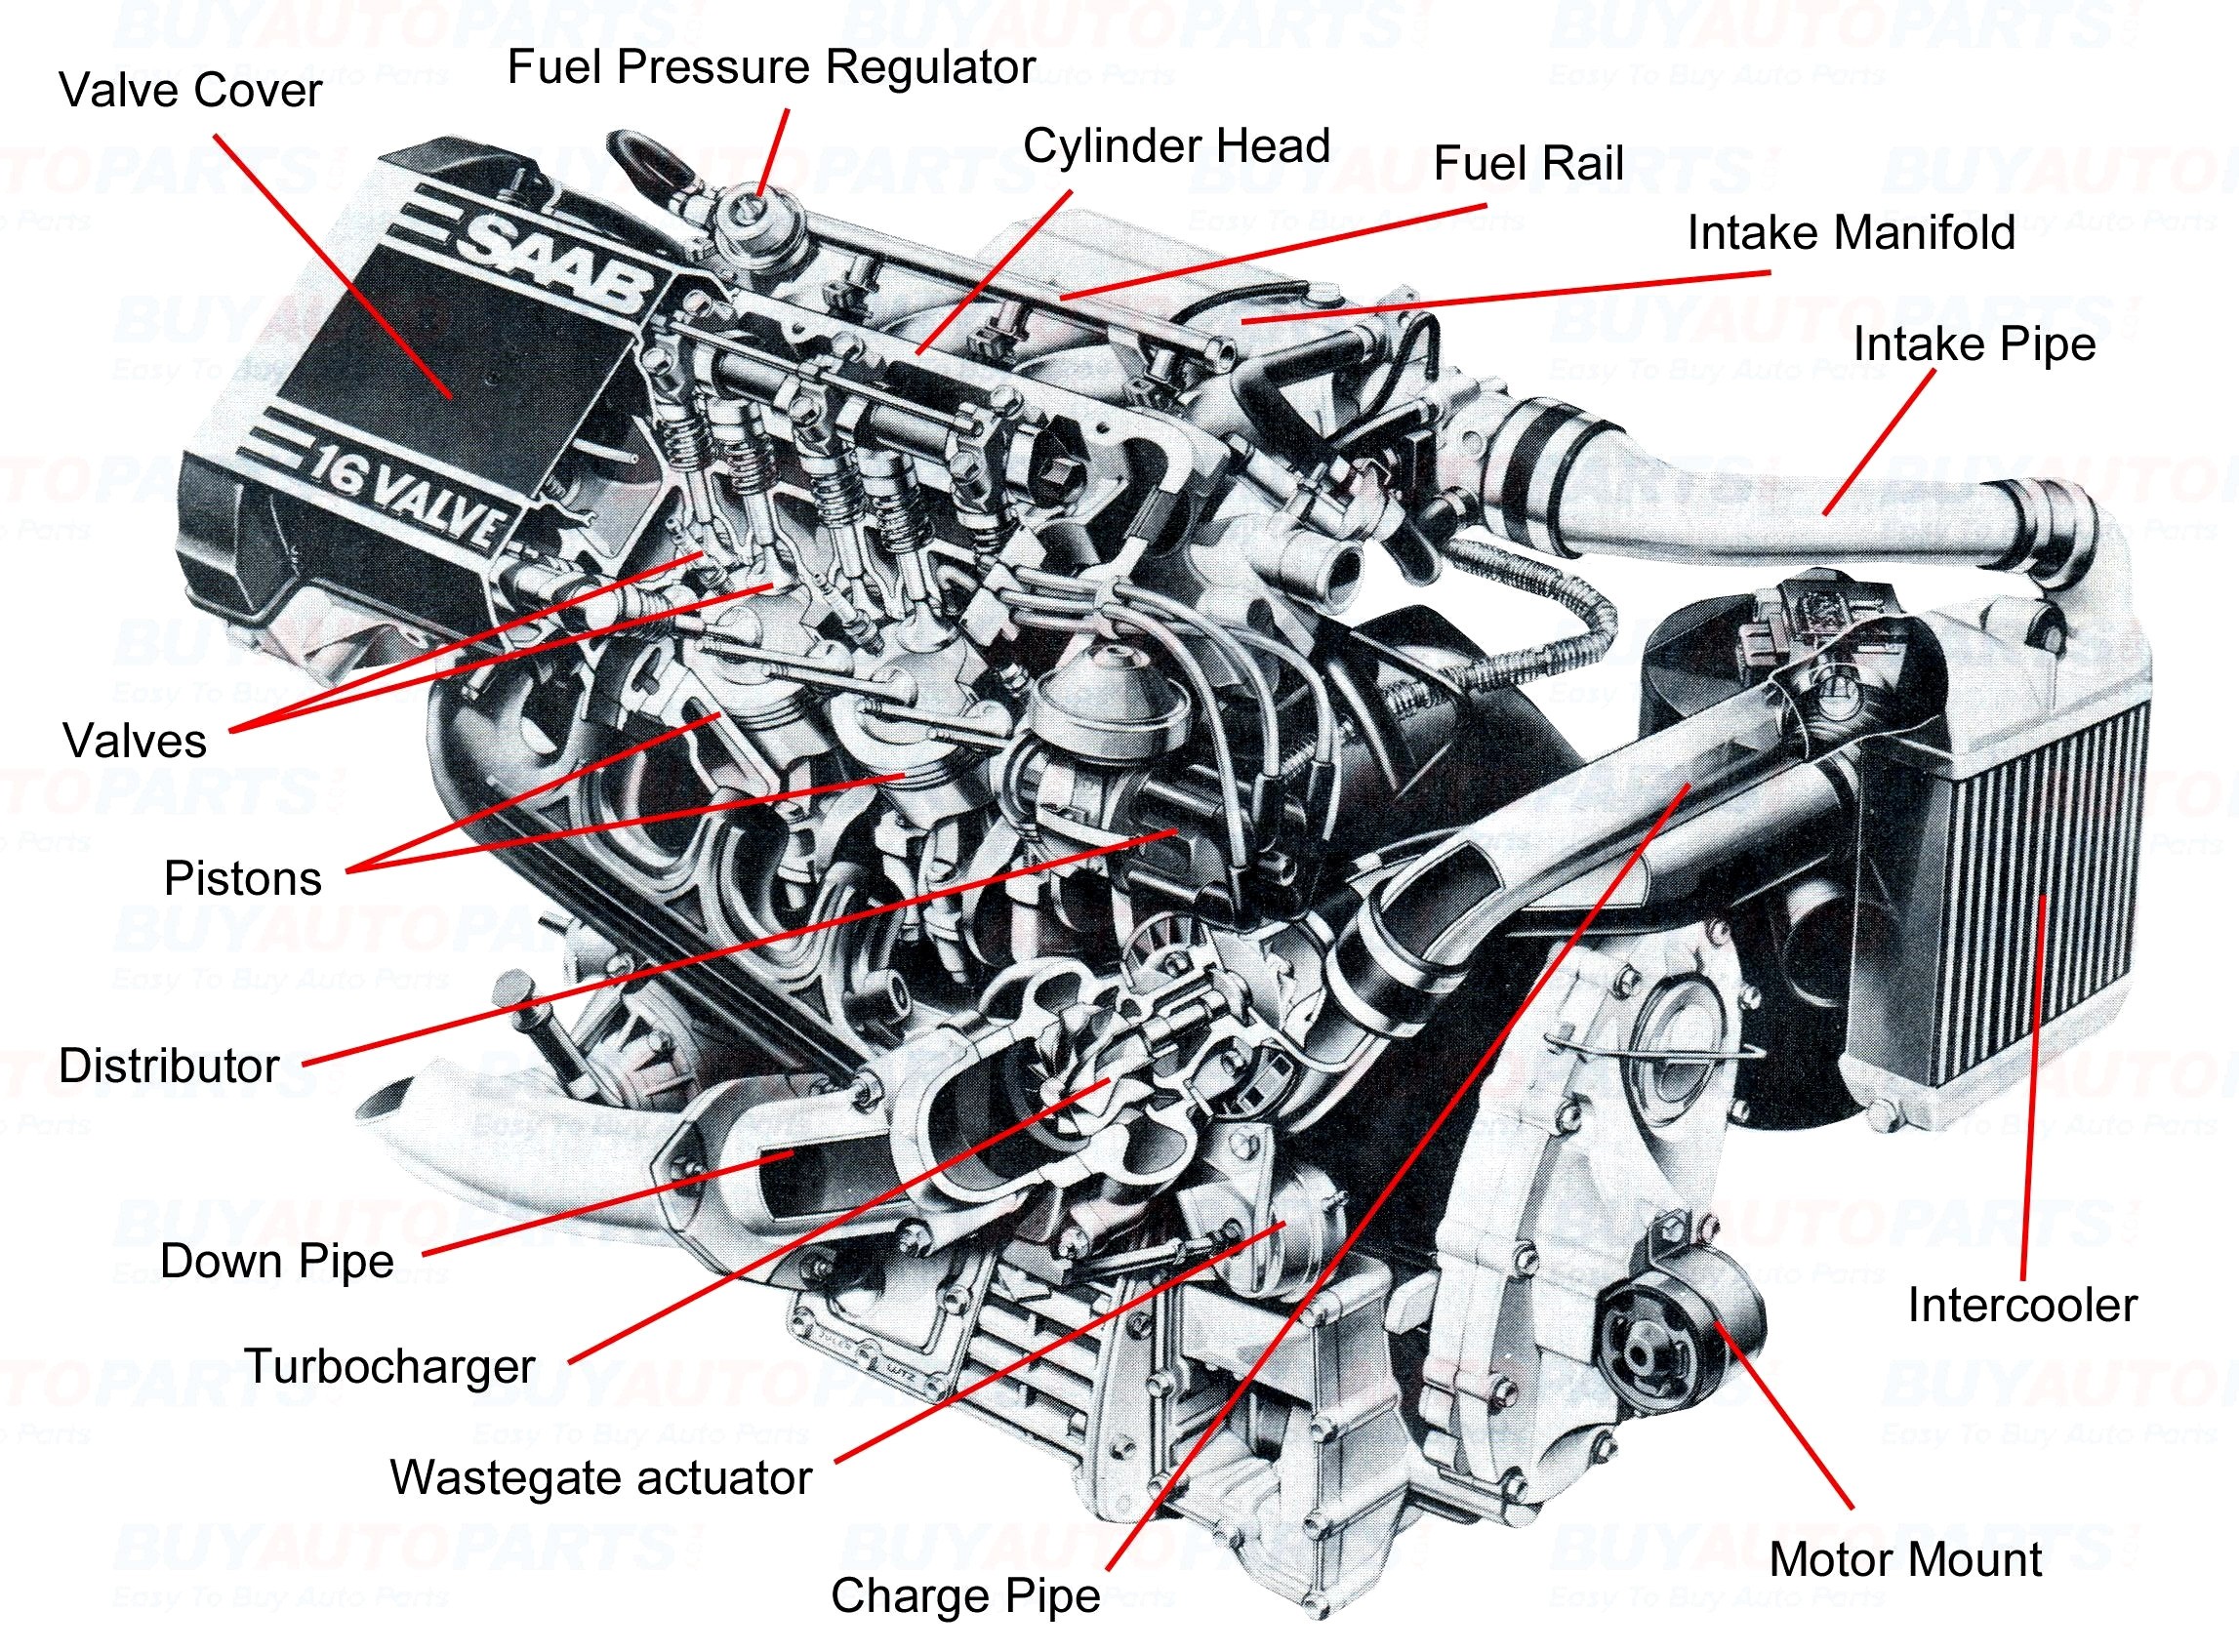 Diagram Of A Car Exhaust System Car Exhaust System Diagram Of Diagram Of A Car Exhaust System